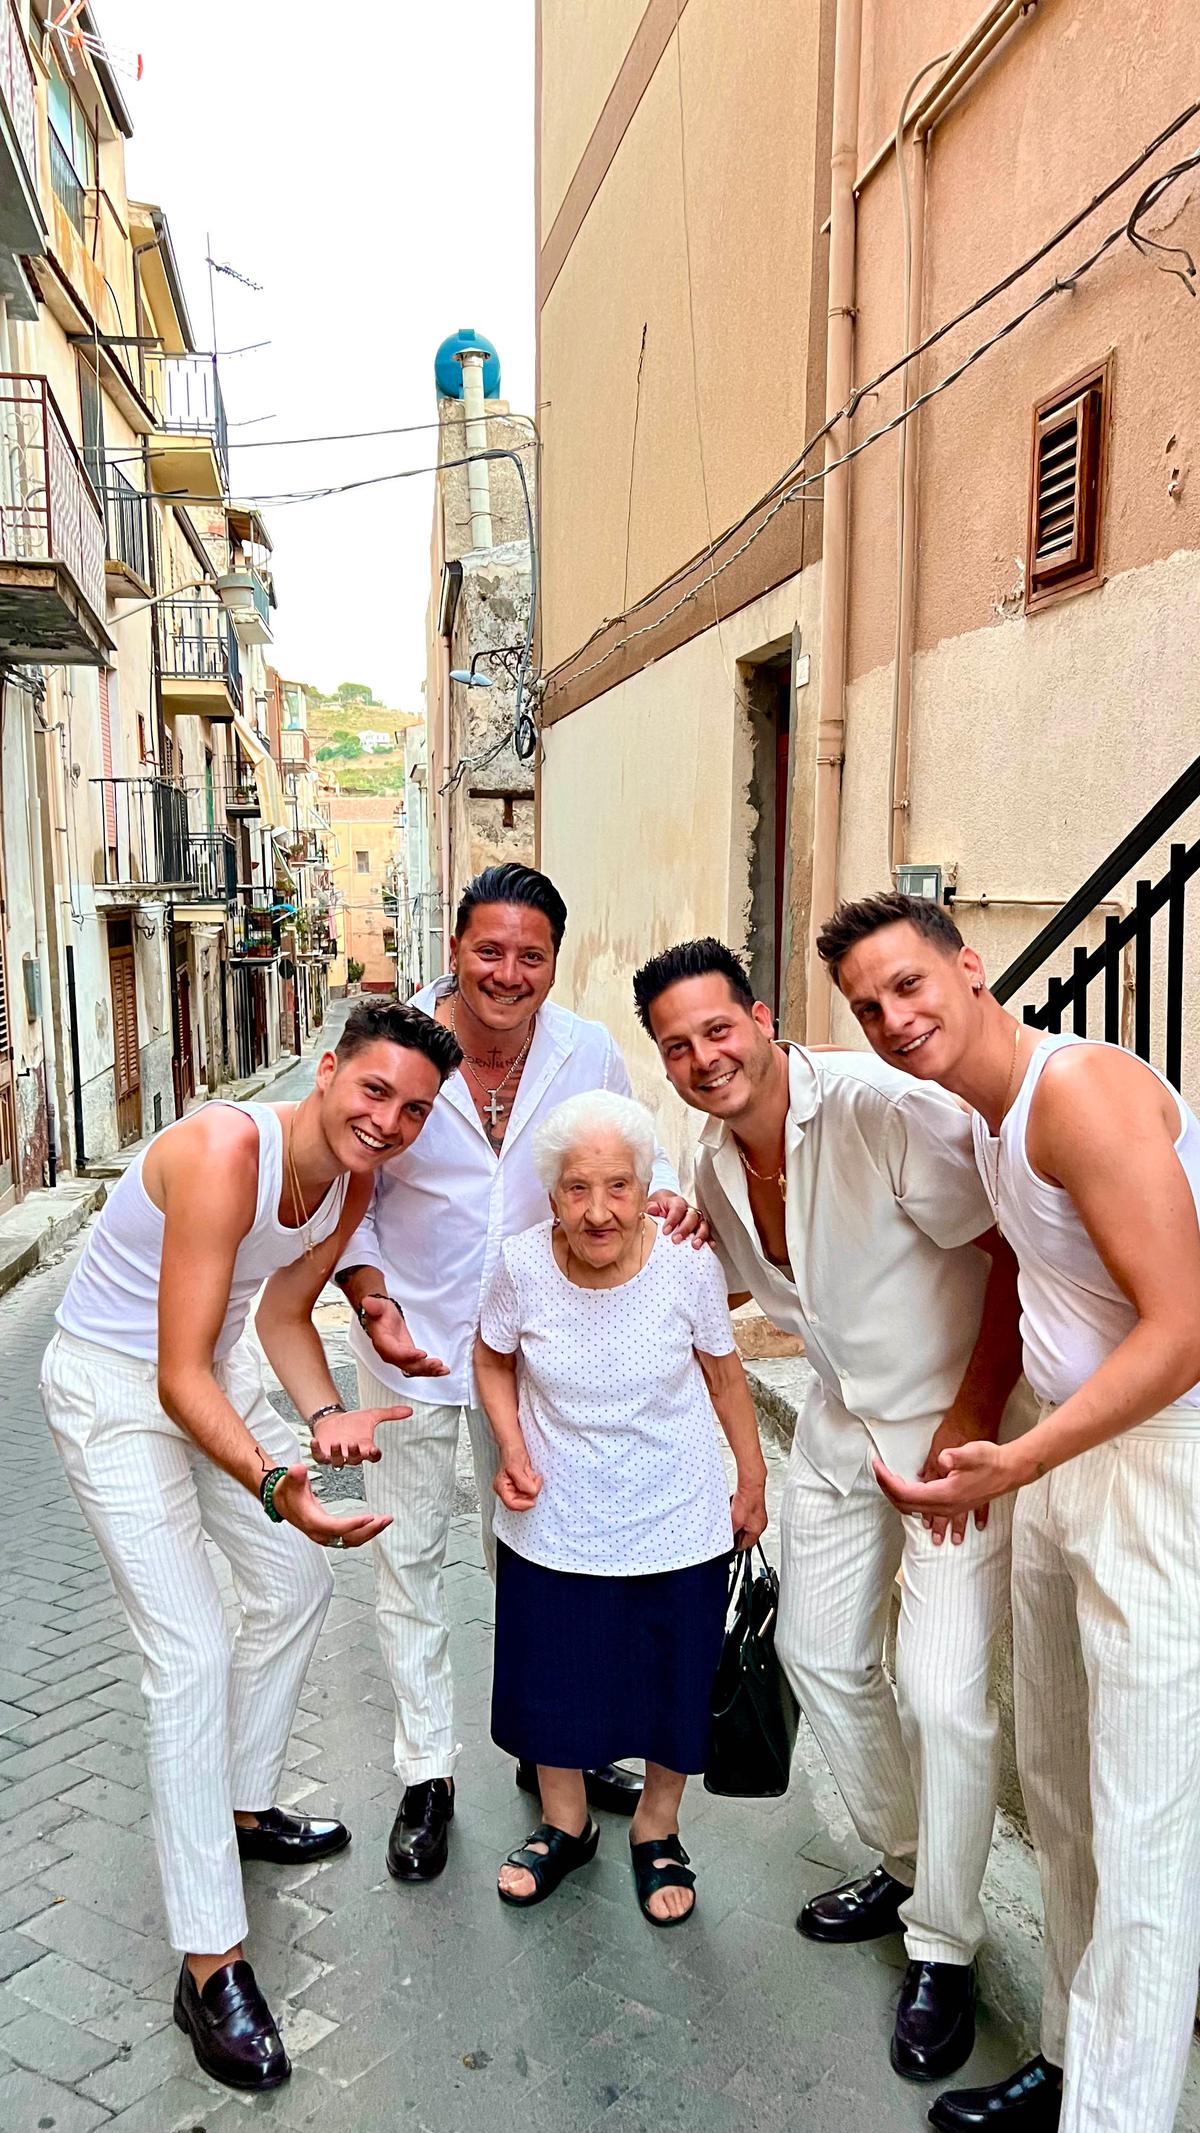 "The Esteriore Brothers" with Rosa. They say the elderly lady's enduring presence has been a constant source of "joy and<br/>inspiration" for them. (Courtesy of The Esteriore Brothers)